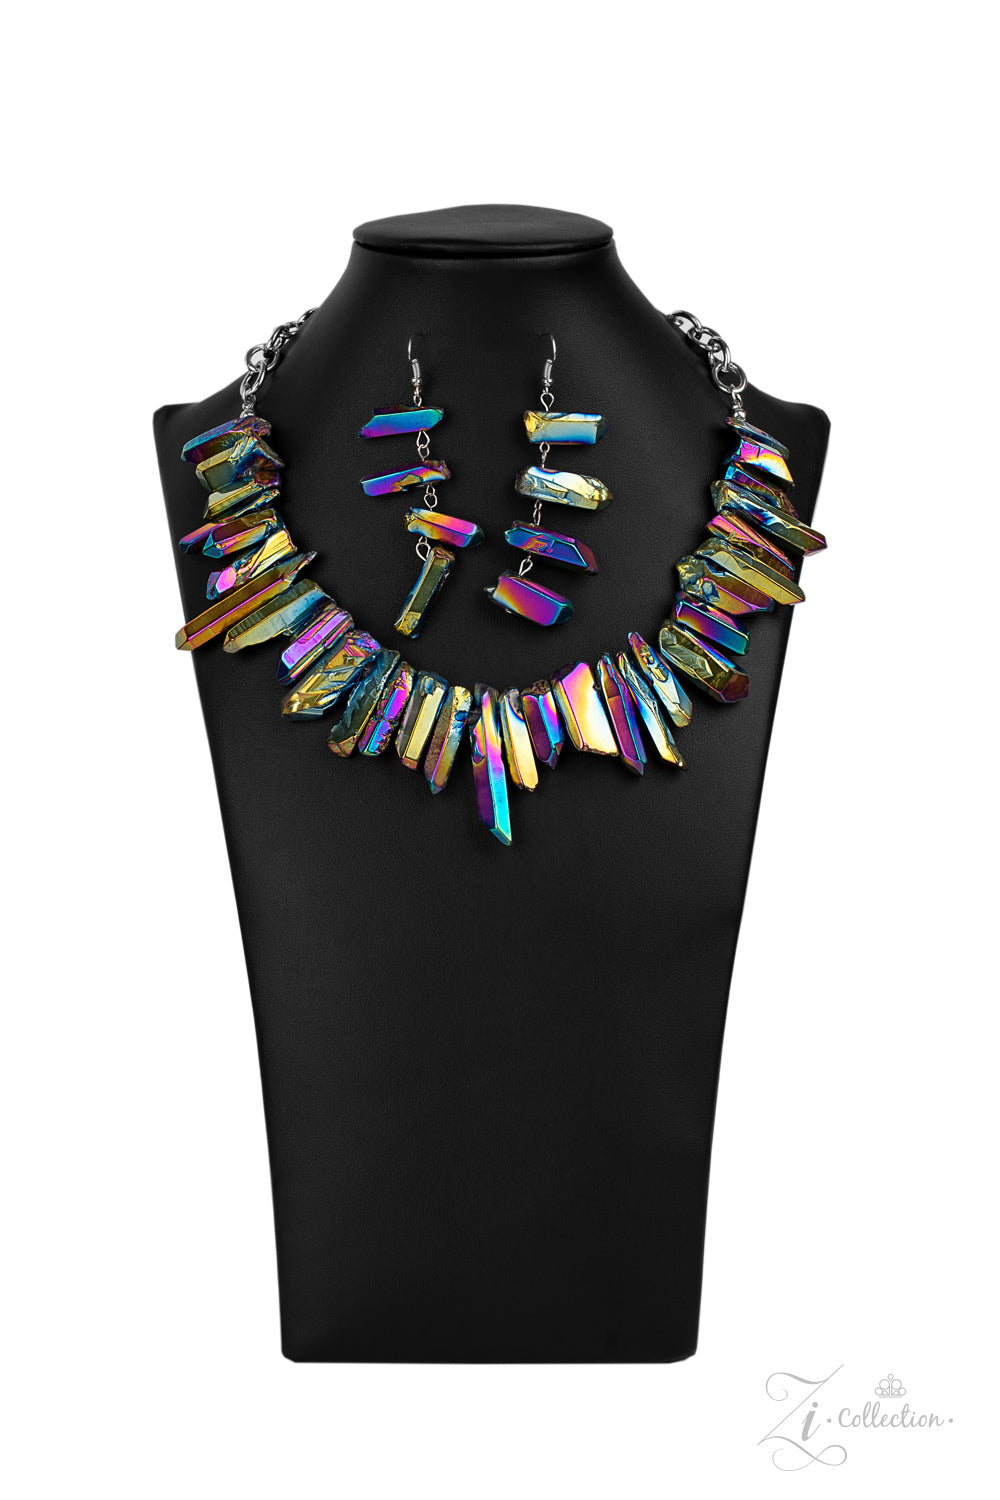 Charismatic Necklace - 2020 Zi Collection